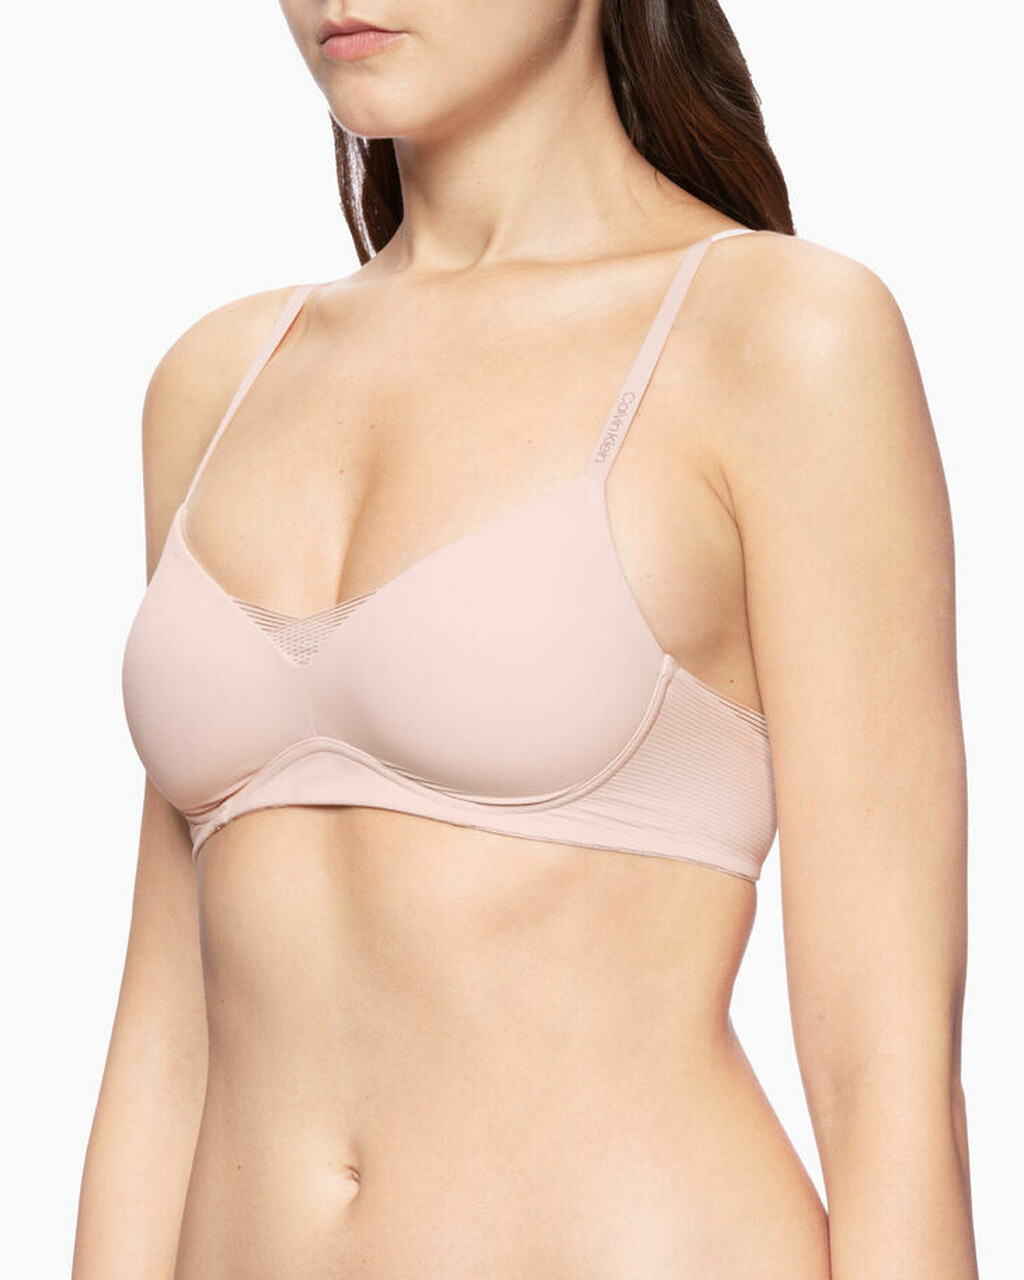 BREATHABLE LIGHTLY LINED WIREFREE BRA, Nymphs Thigh, hi-res